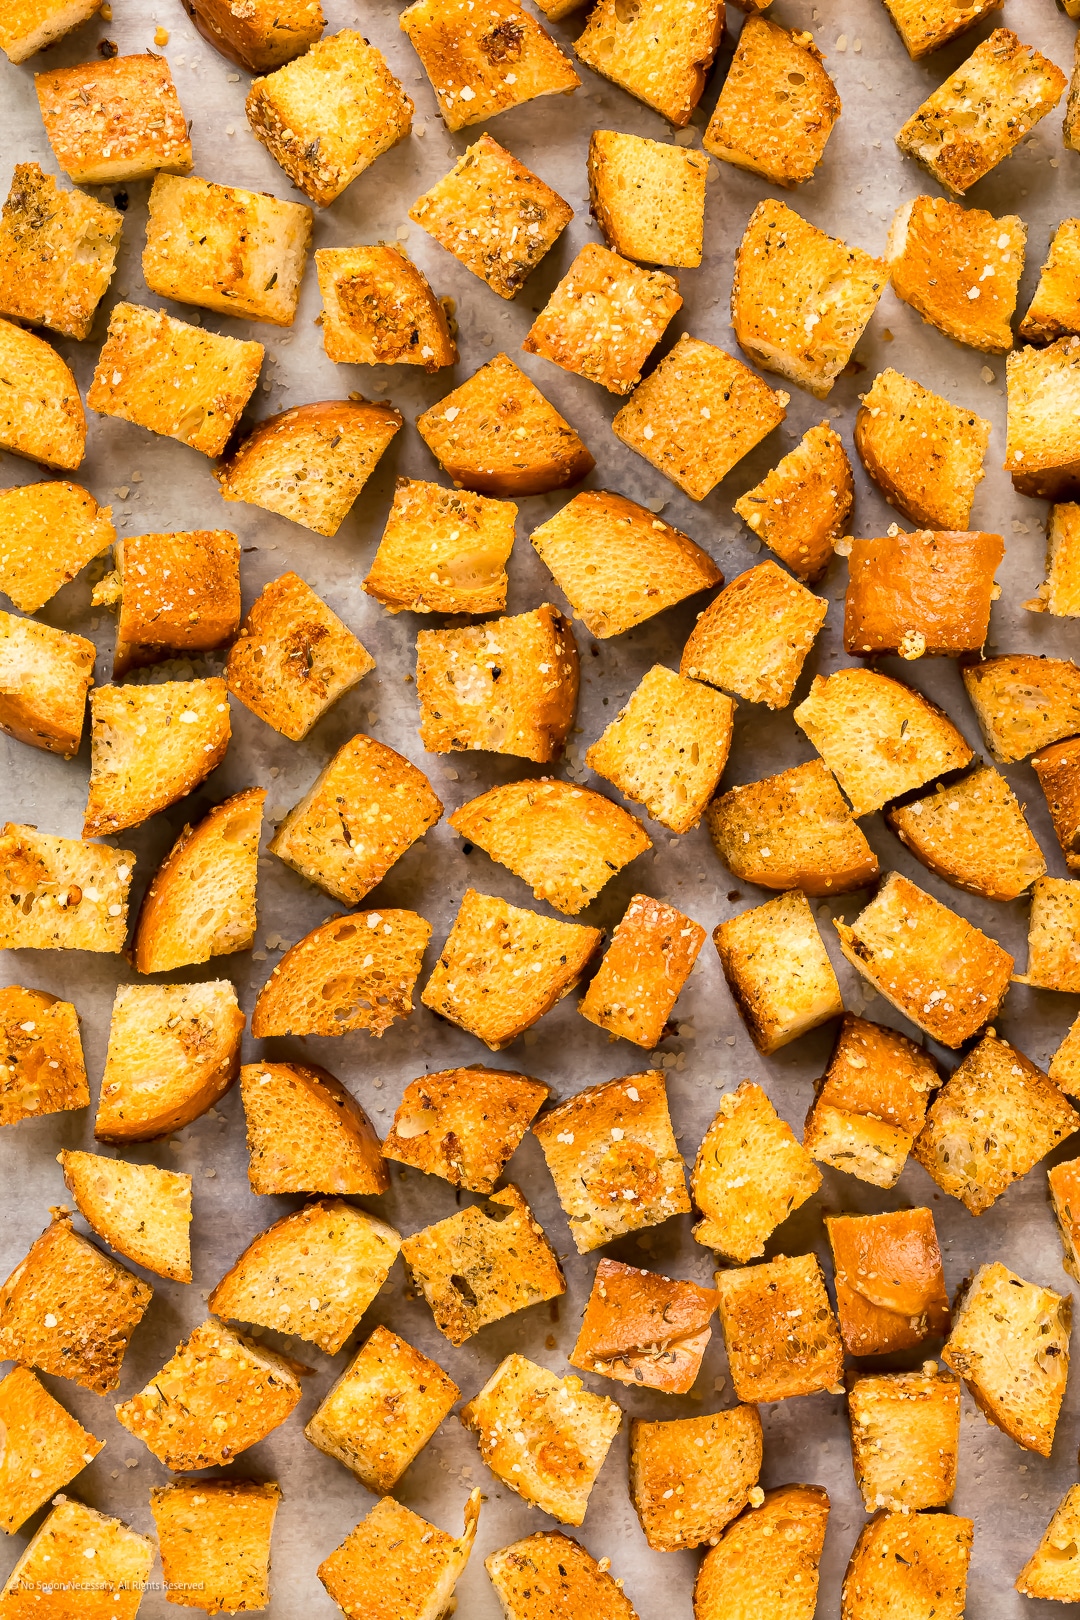 Homemade Croutons Recipe: How to Make Croutons in the Oven